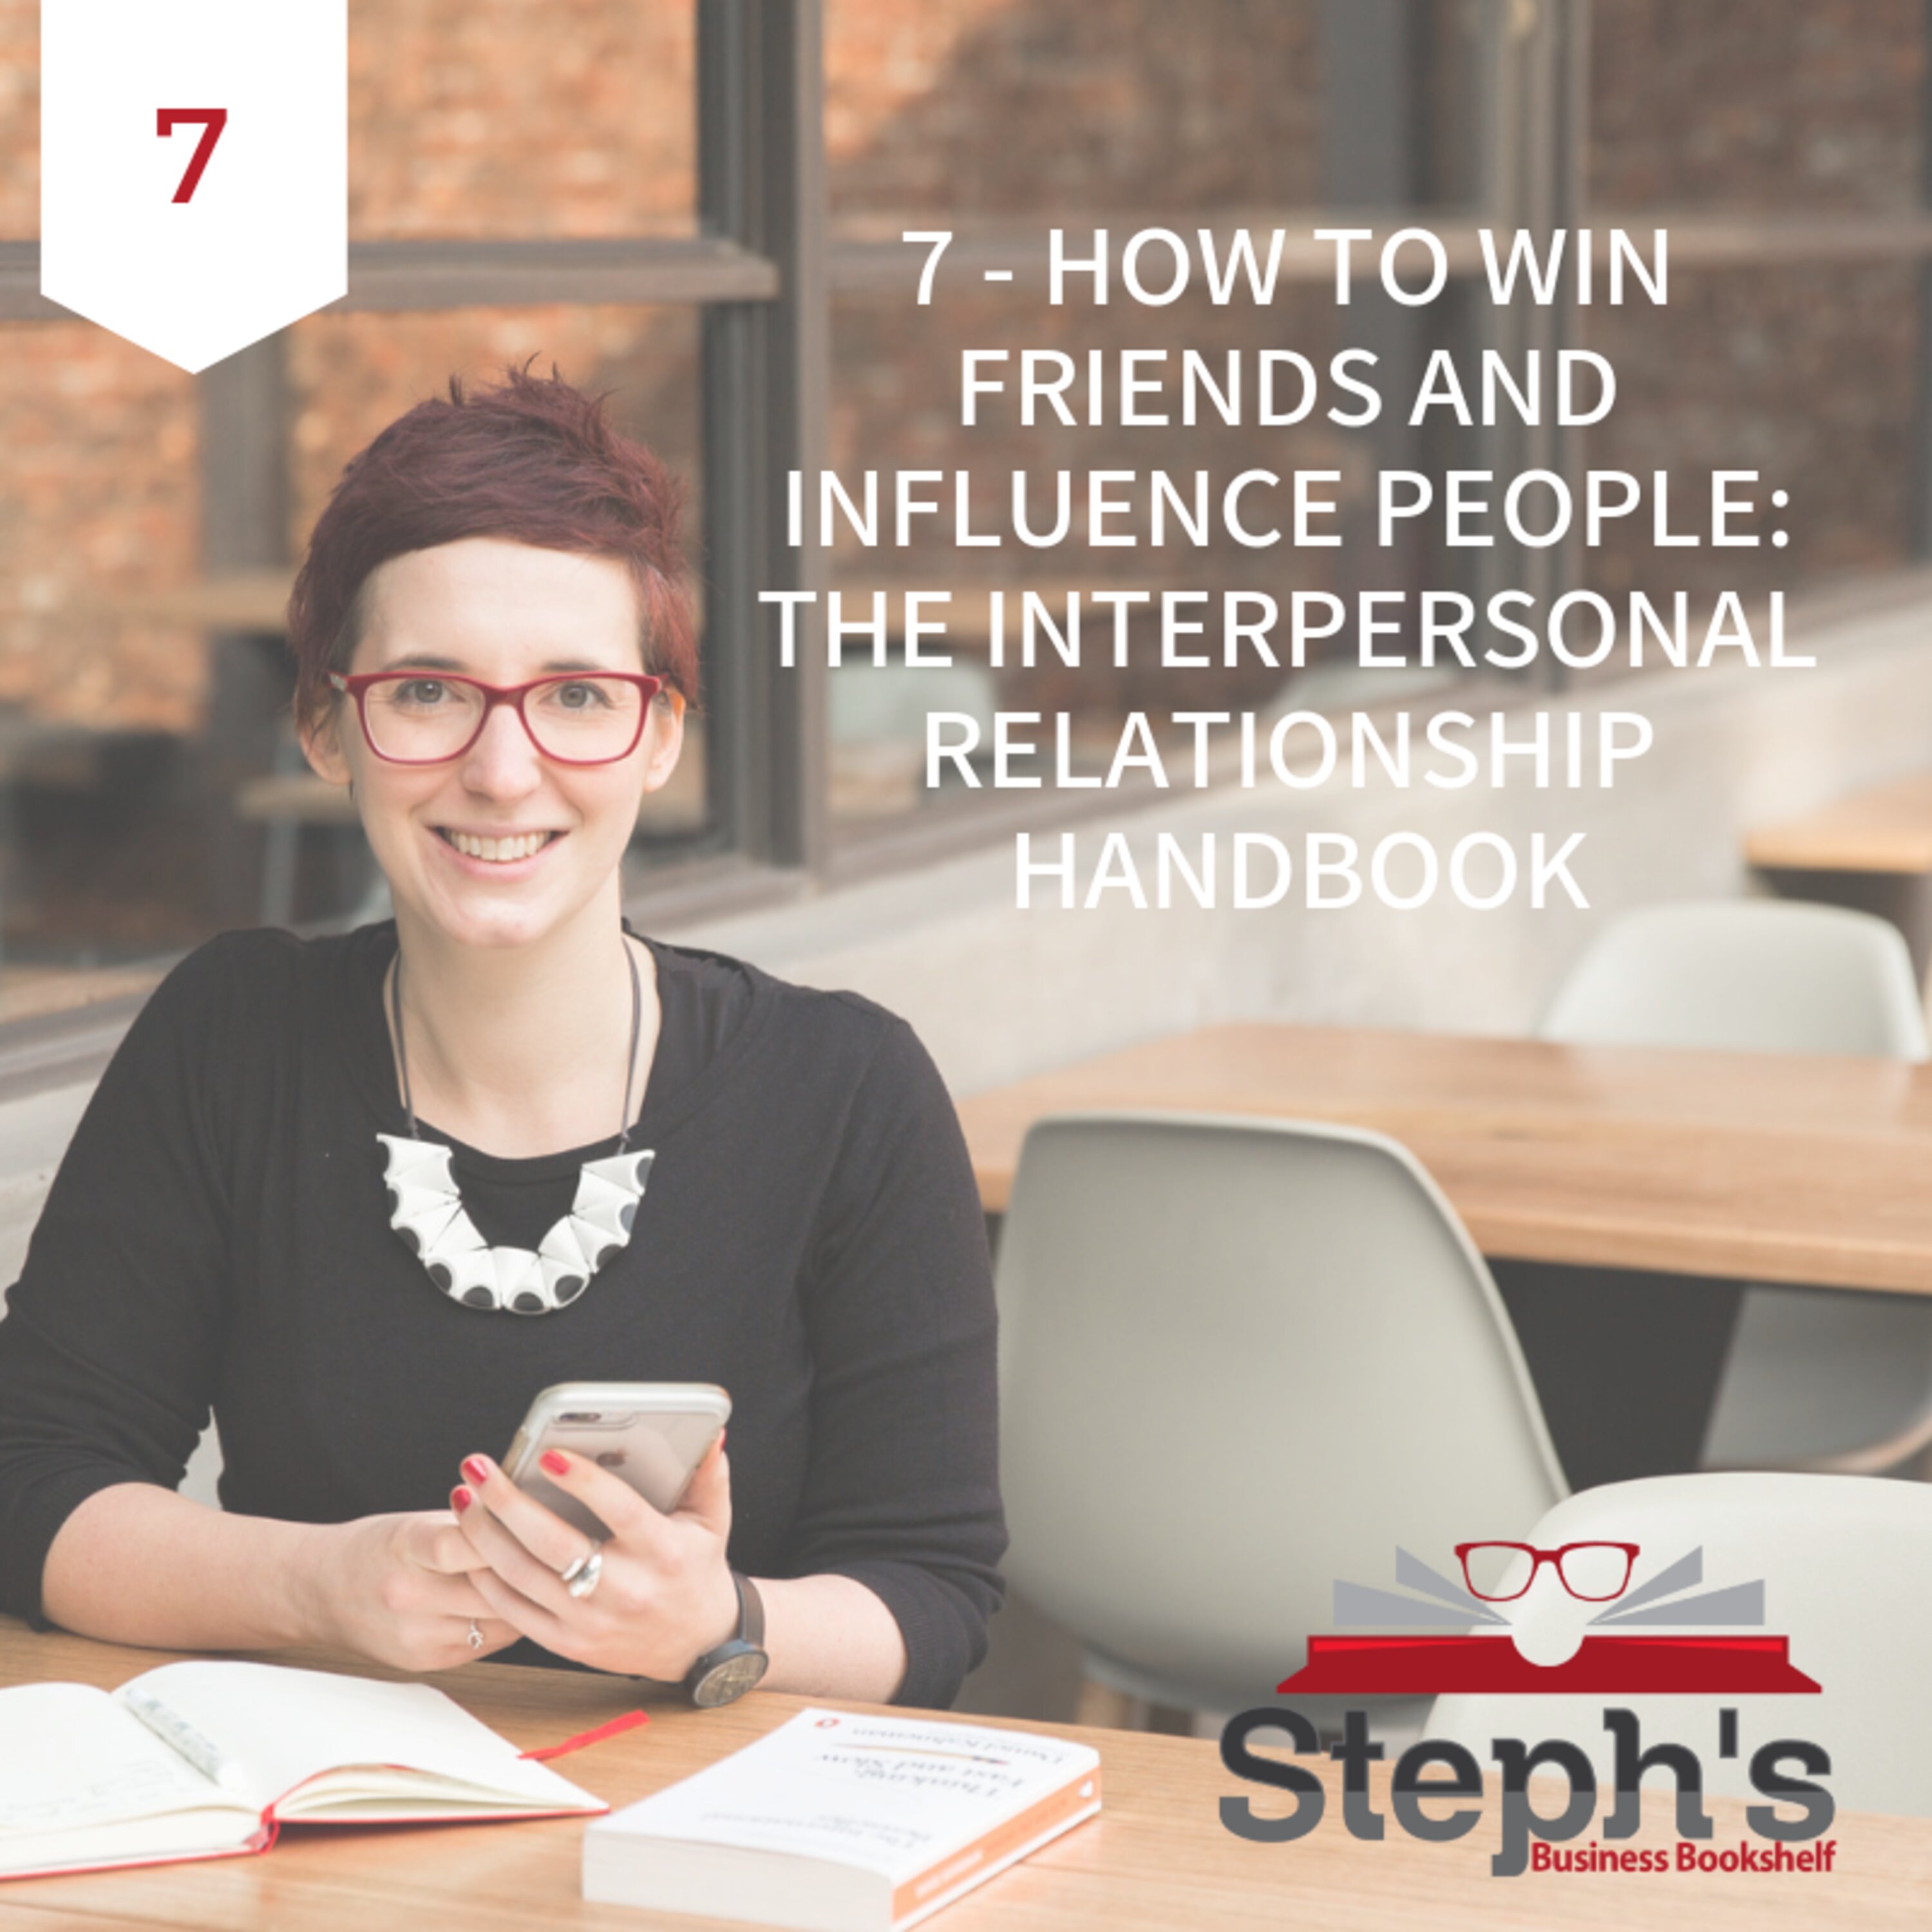 How to Win Friends and Influence People by Dale Carnegie: The interpersonal relationship handbook